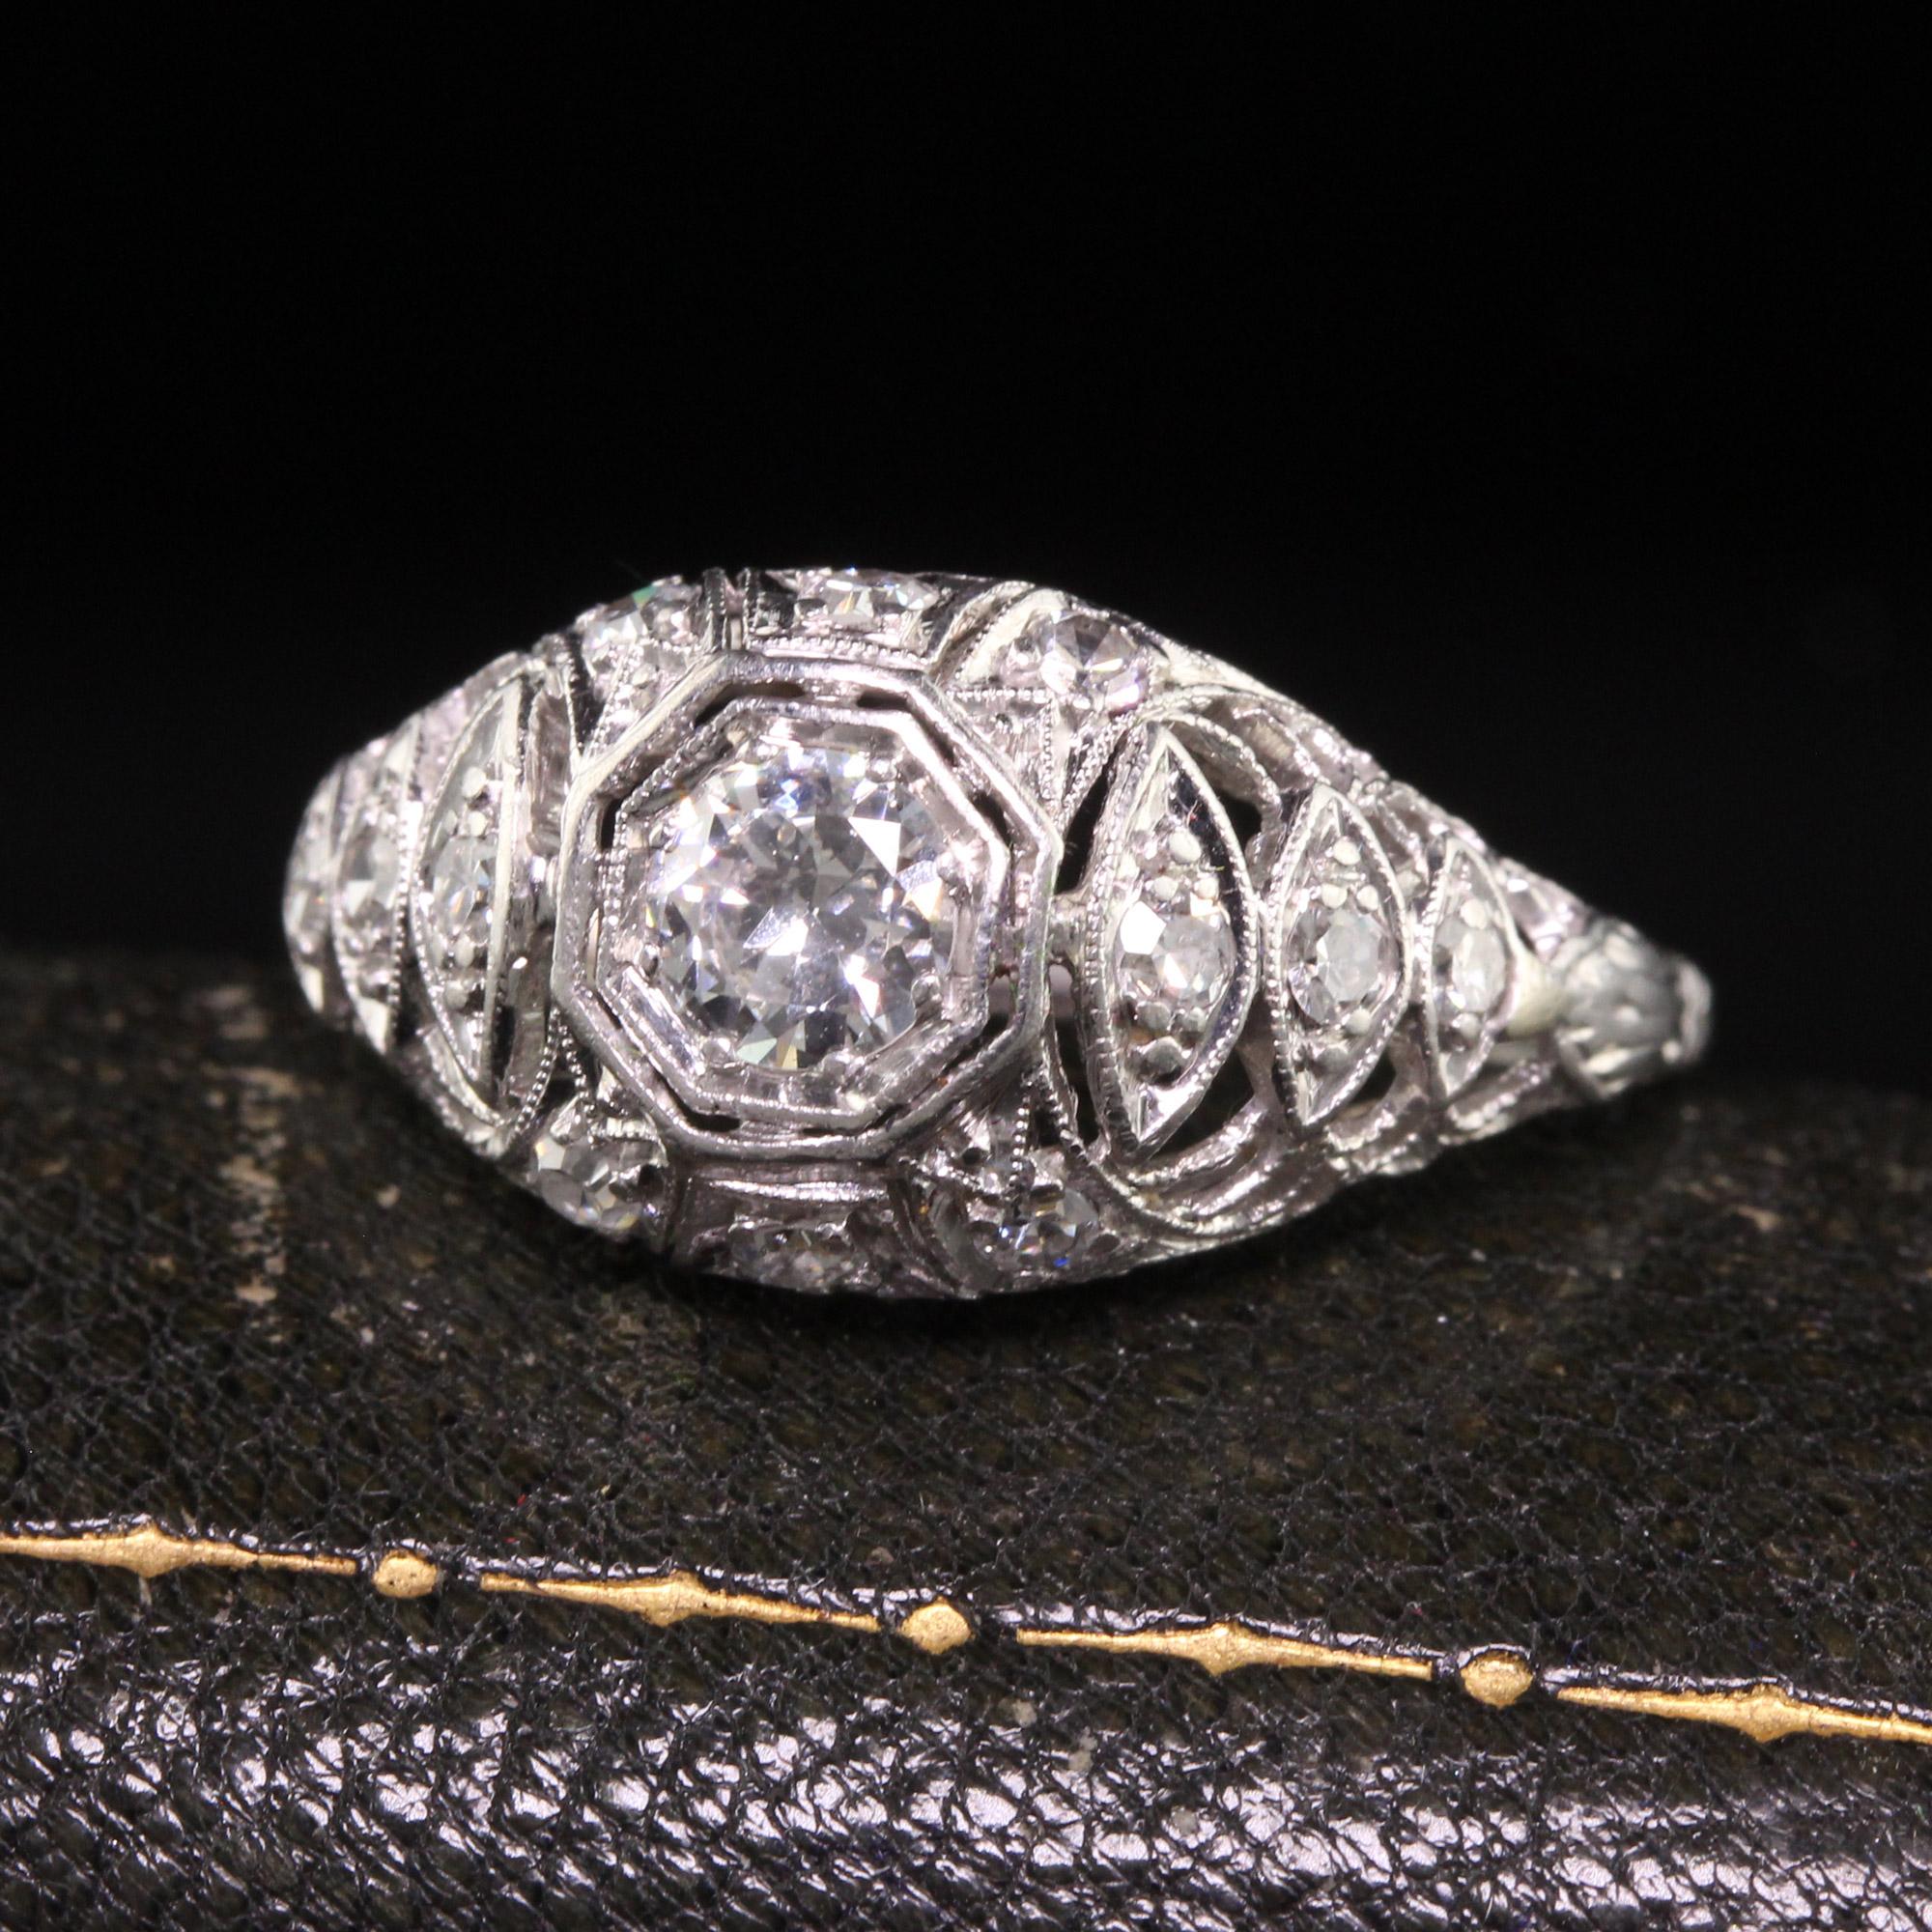 Beautiful Antique Art Deco Platinum Old European Diamond Filigree Engagement Ring. This gorgeous ring is crafted in platinum. The center holds an old european cut diamond in a beautiful filigree mounting. The smaller diamonds are single cut and the